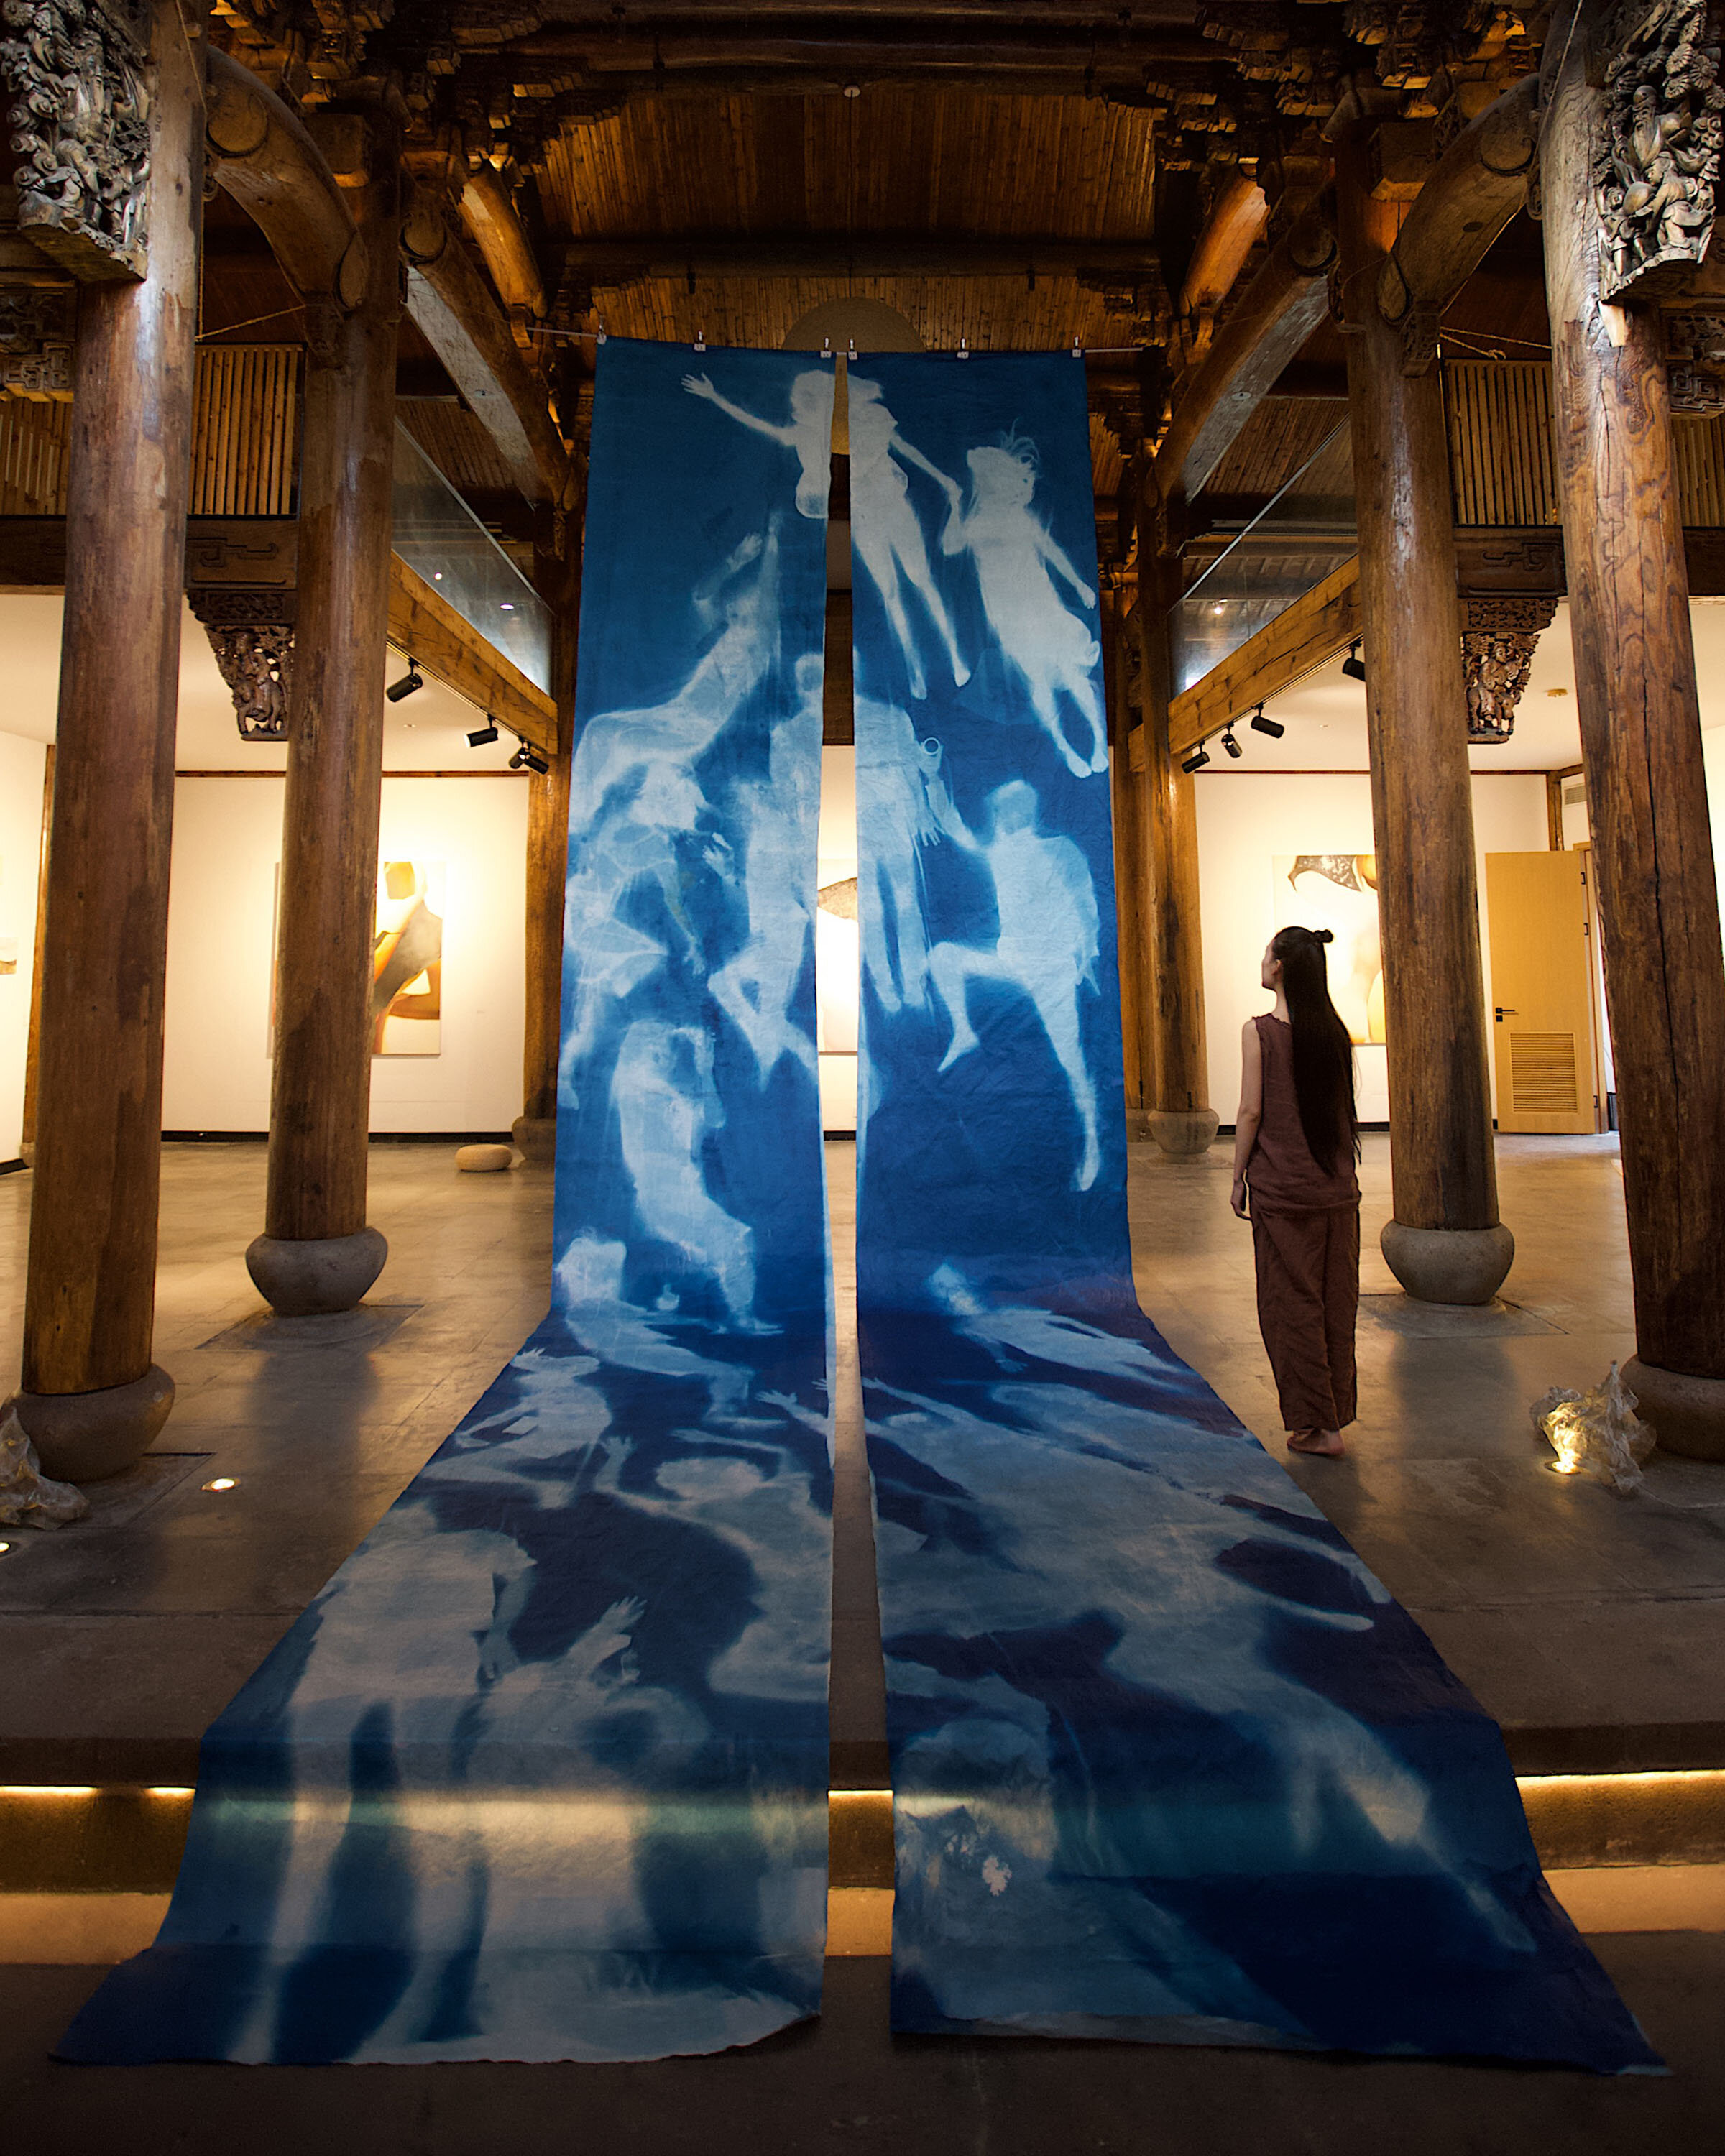  Han Qin,  The Direction of Migration (Diptych) , 2019, Cyanotype on paper, 3307 x 94.5 inches (8400 x 240 cm) ©Han Qin, courtesy Fou Gallery 